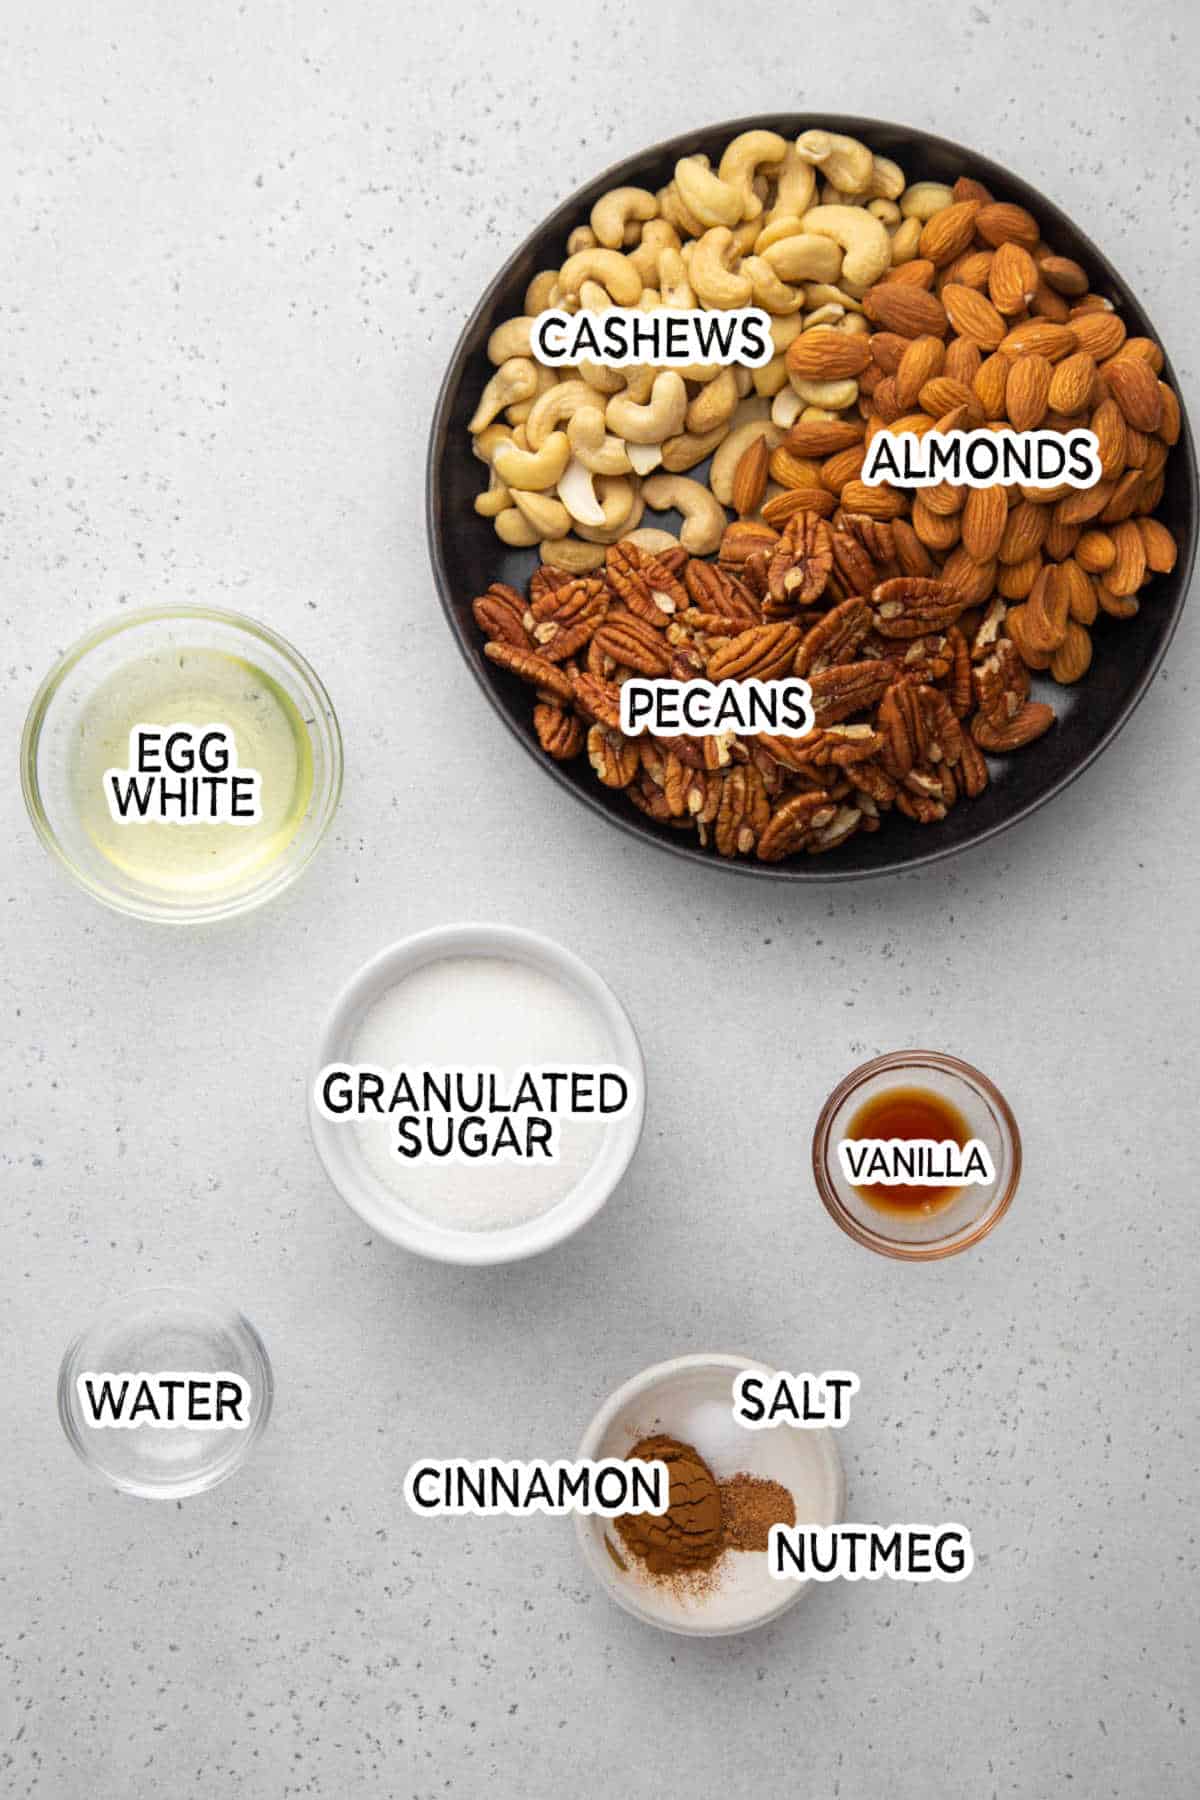 Ingredients to make crockpot candied nuts.